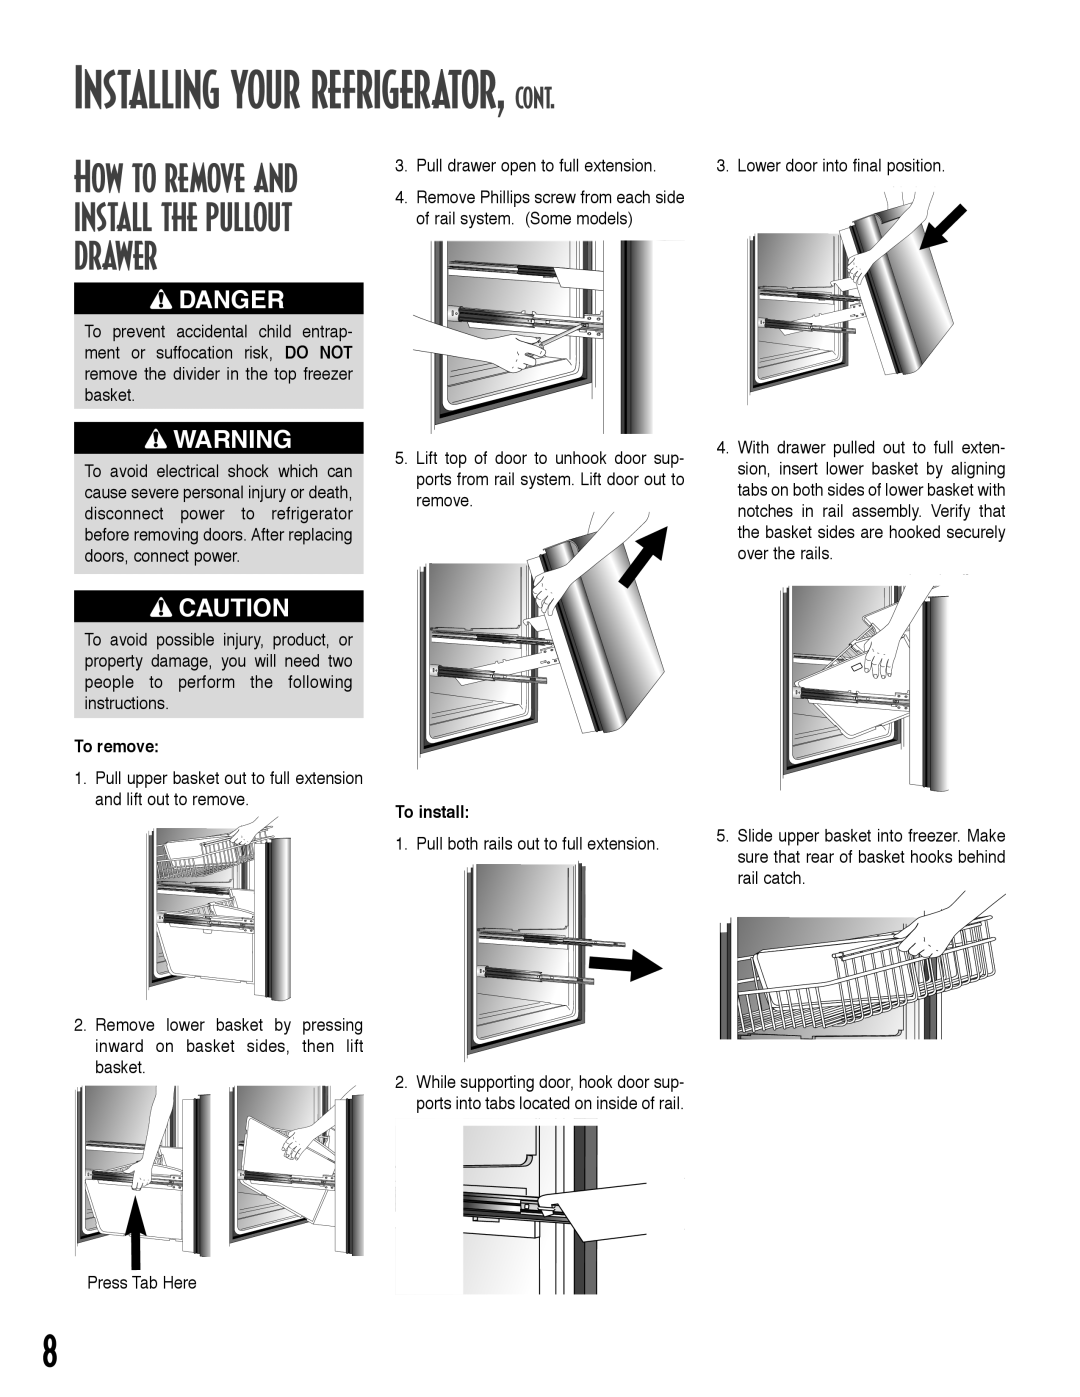 Maytag ARB2257CW How to remove and install the pullout drawer, Installing your refrigerator, cont, Danger, To remove 